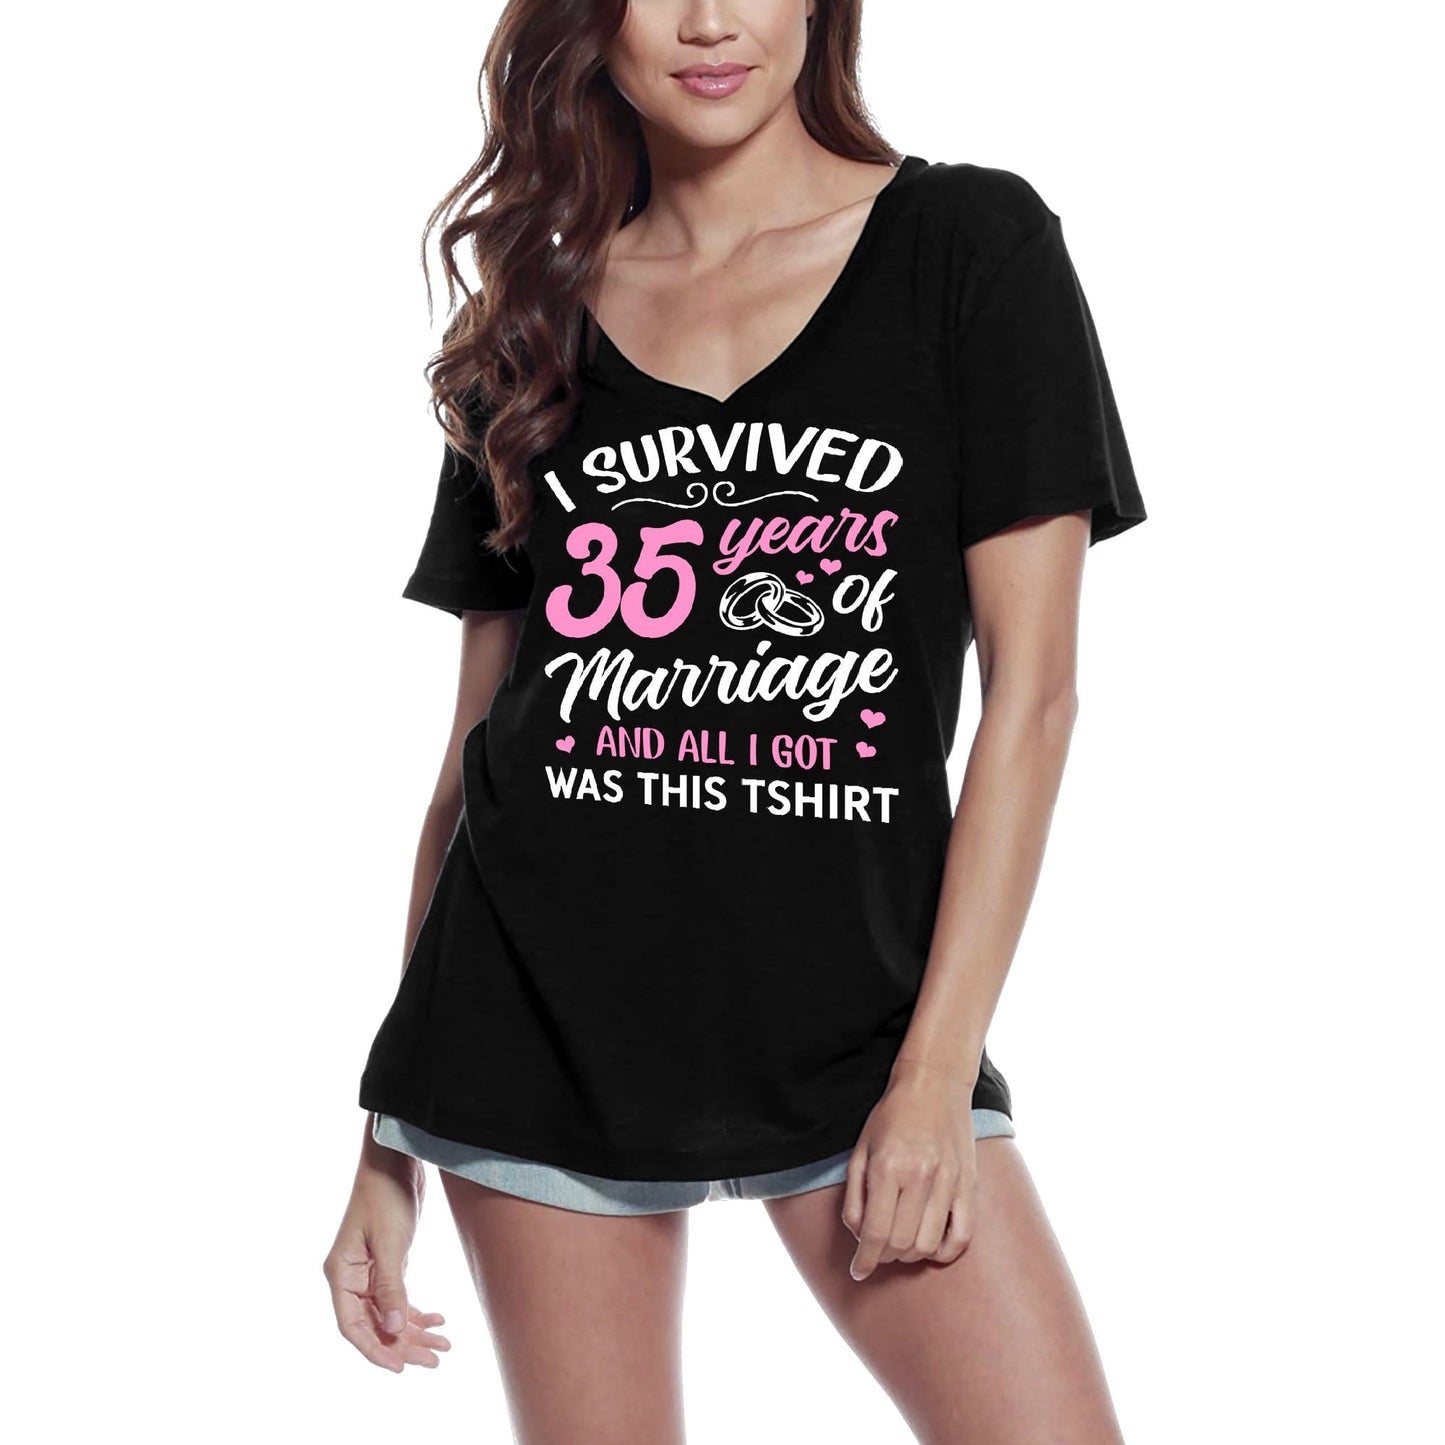 ULTRABASIC Damen-T-Shirt „I Survived 35 Years of Marriage and All I Got is This Tshirt“ – lustiges Jubiläums-T-Shirt